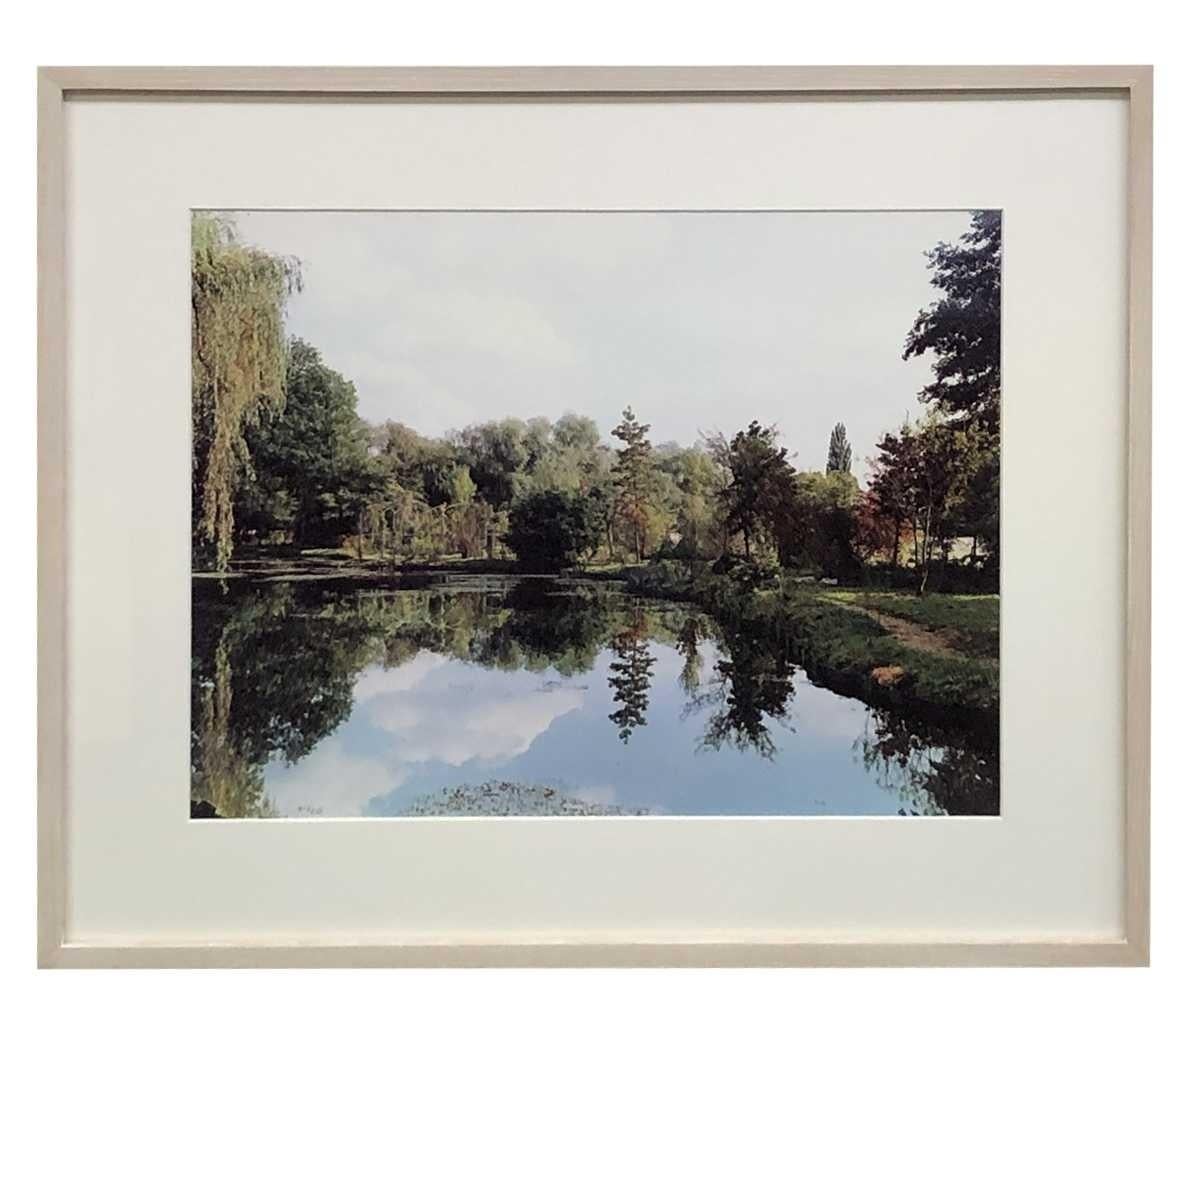 Color Landscape Photograph, Pond View 2, Gardens at Giverny, 1982, Stephen Shore

Stephen Shore, pond view, gardens at Giverny, 1982, signed, Dye Transfer Photograph; Monet's Gardens, Giverny, Signed in Ink, from original edition of 50 of the